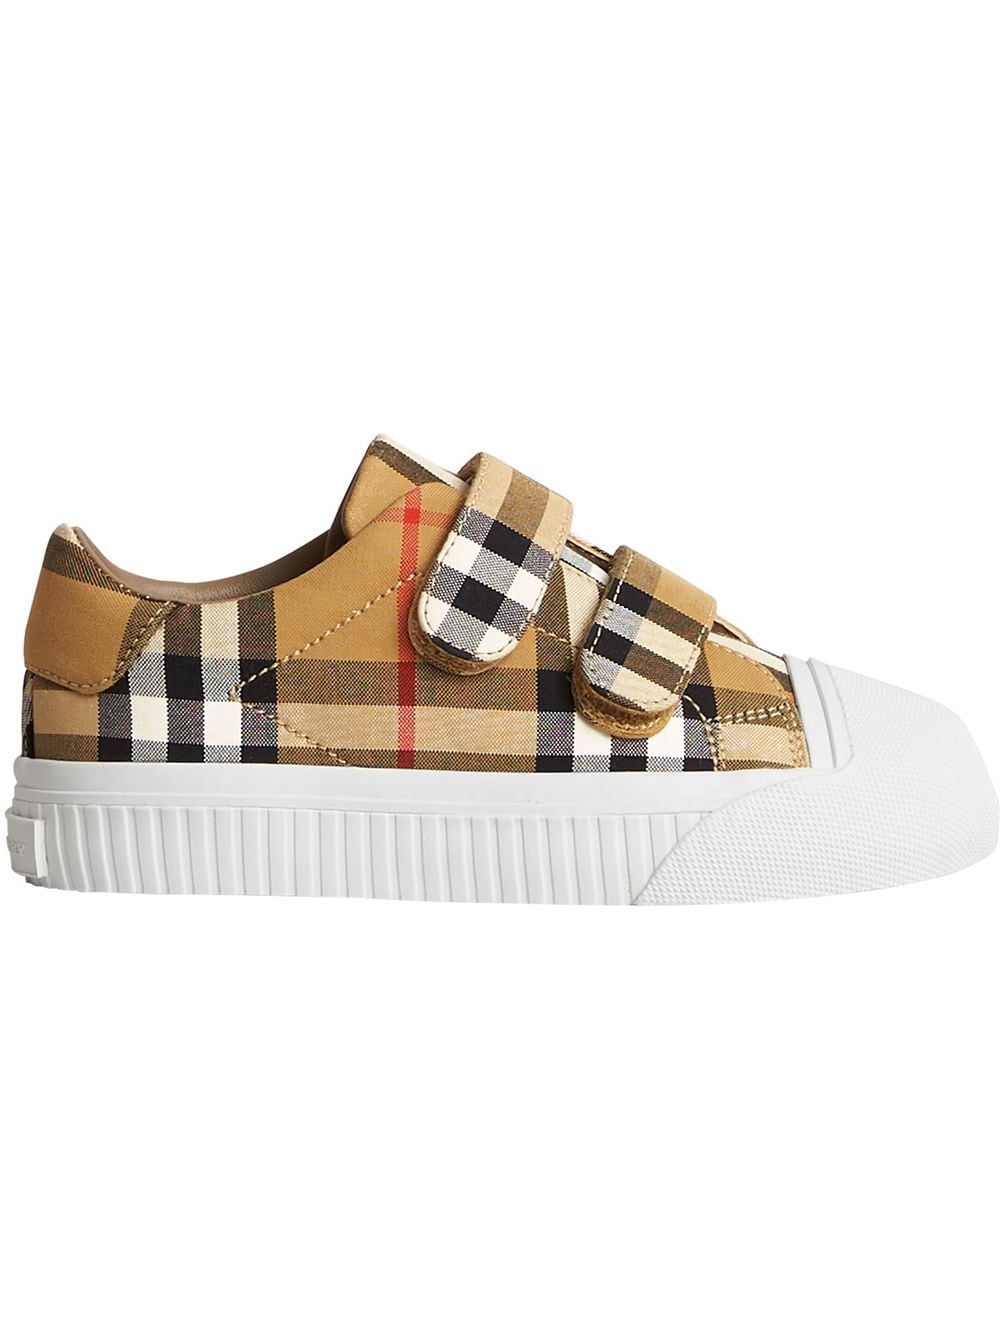 Burberry Kids Vintage Check and Leather 